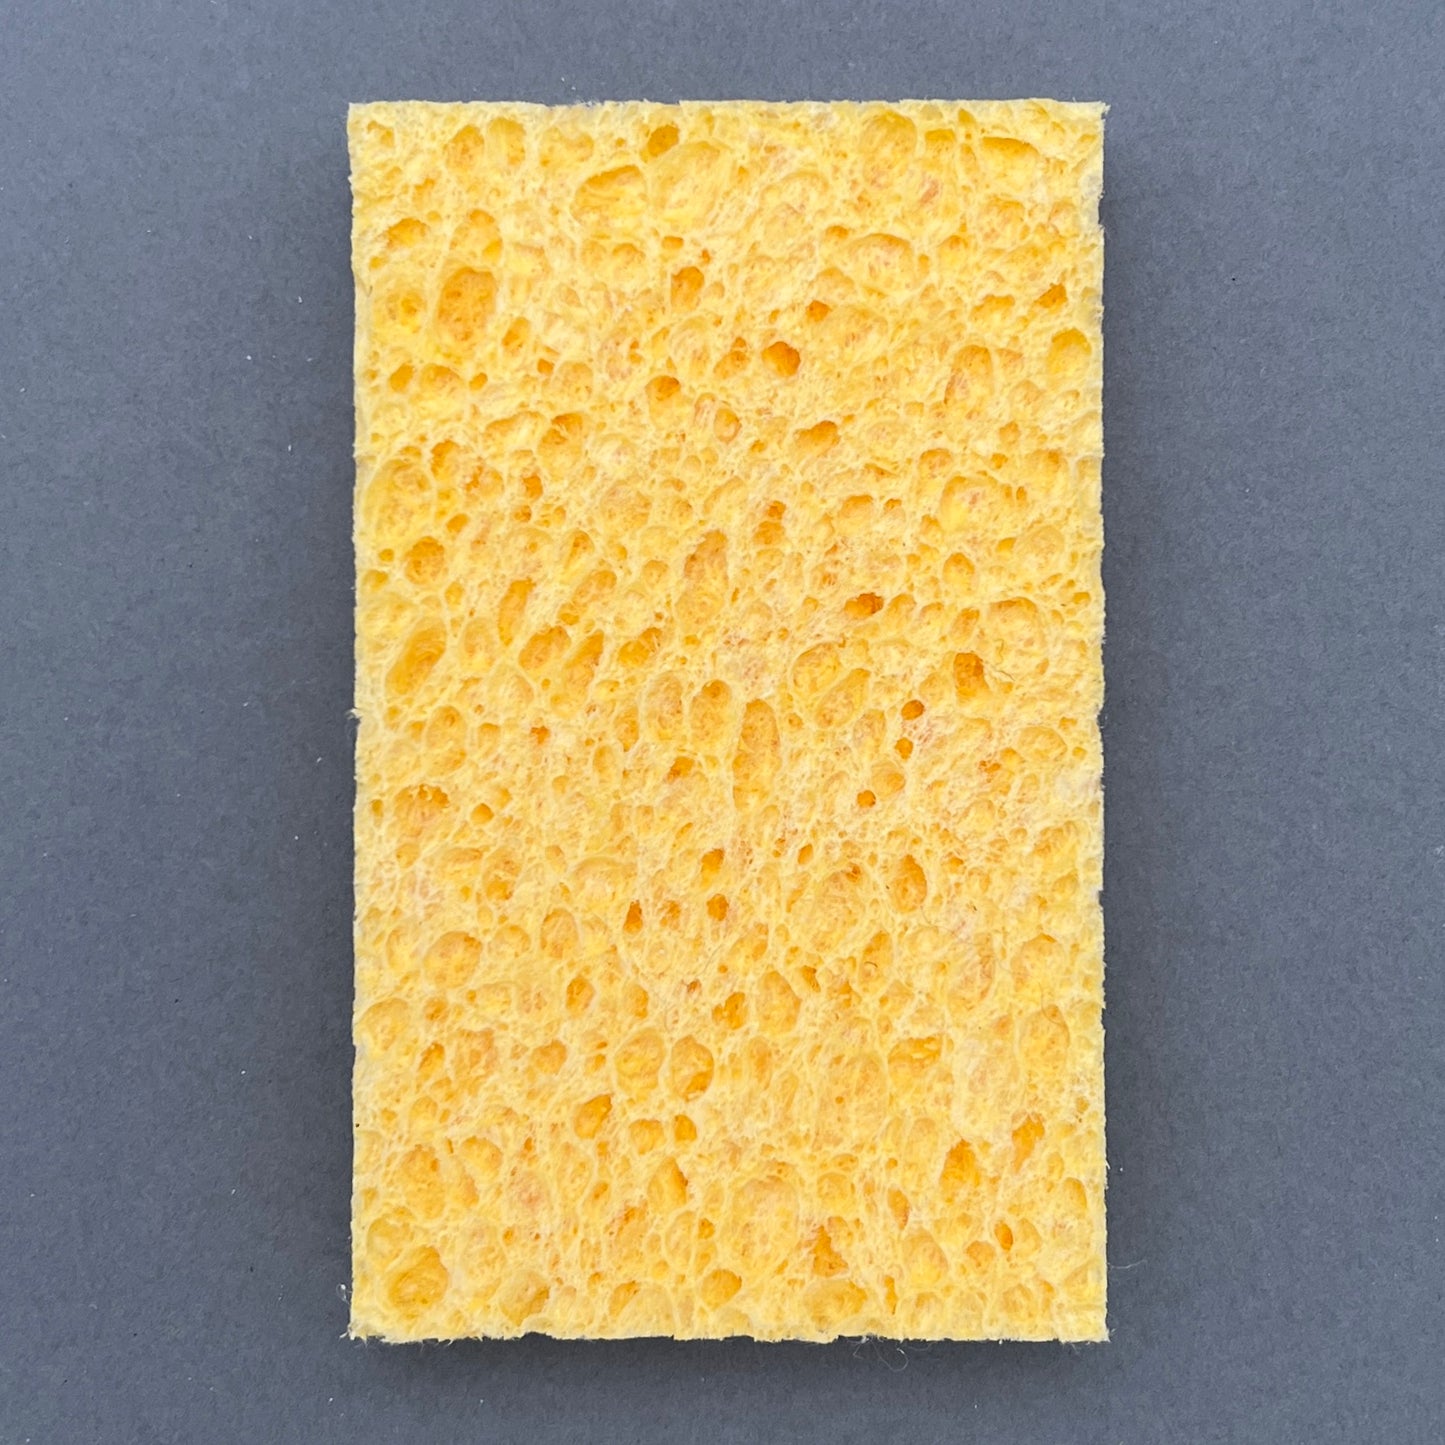 The backside of a rectangular kitchen sponge laying on a gray background